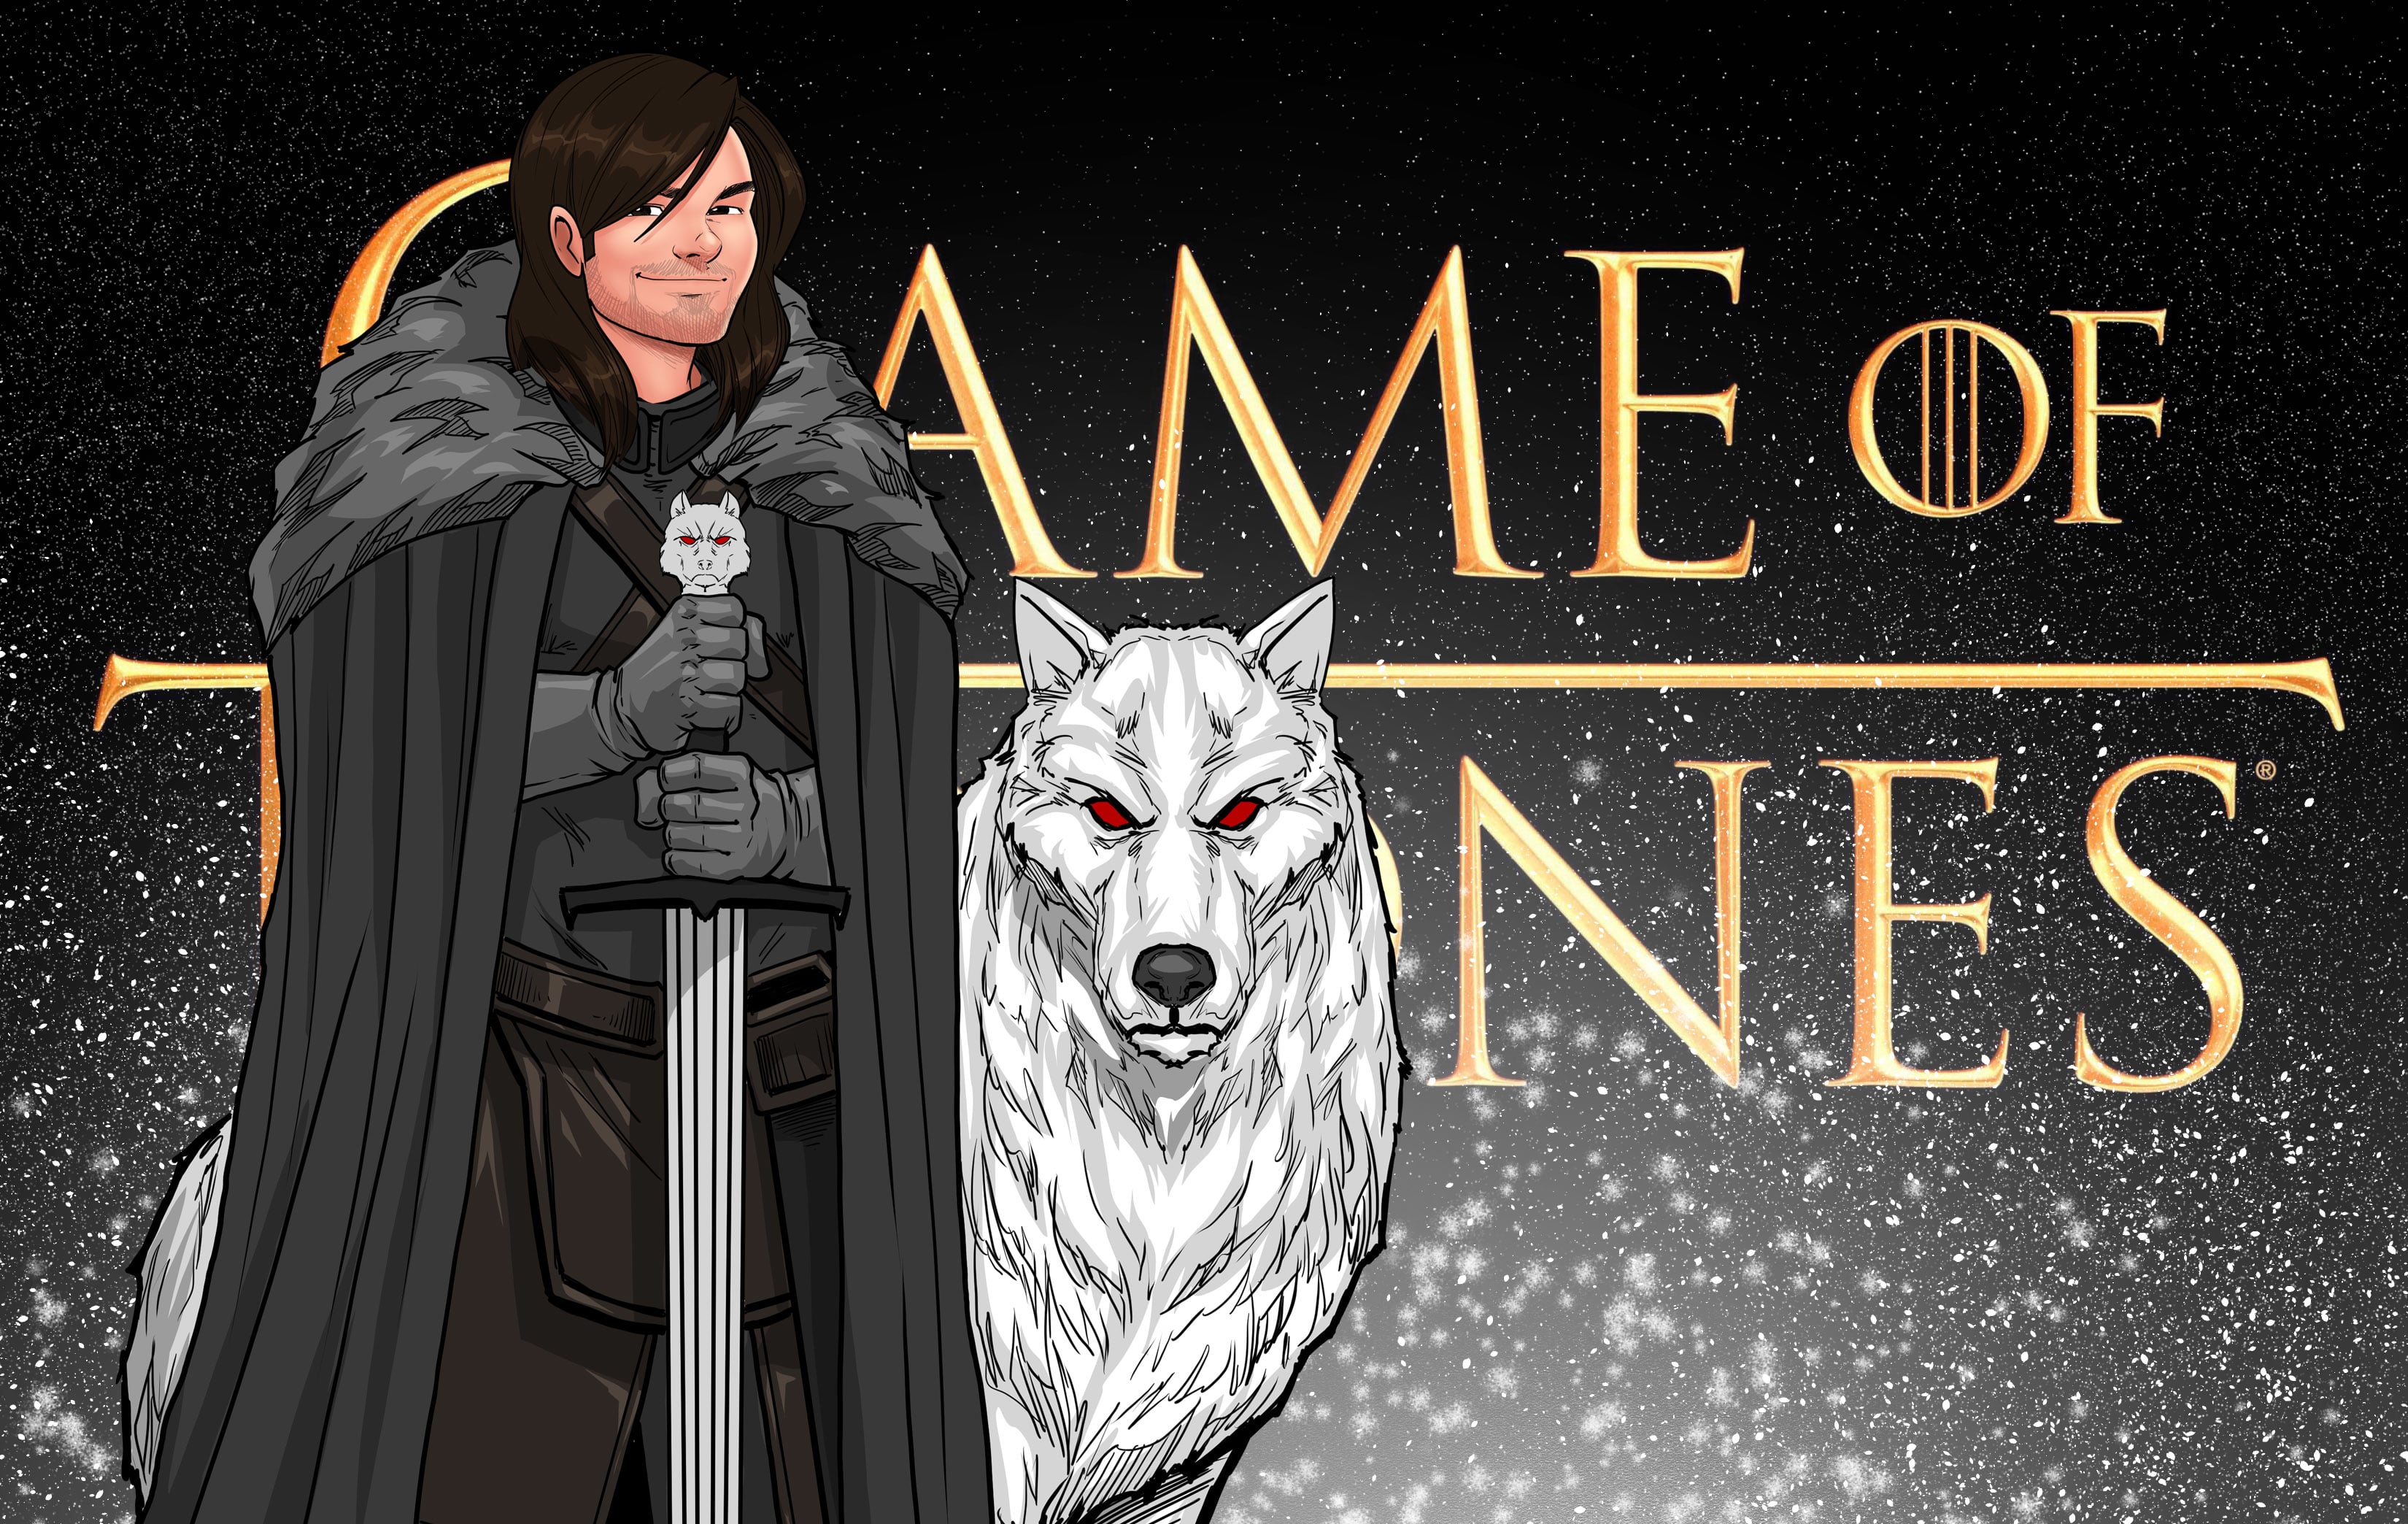 Draw a game of thrones cartoon by Willnoname | Fiverr